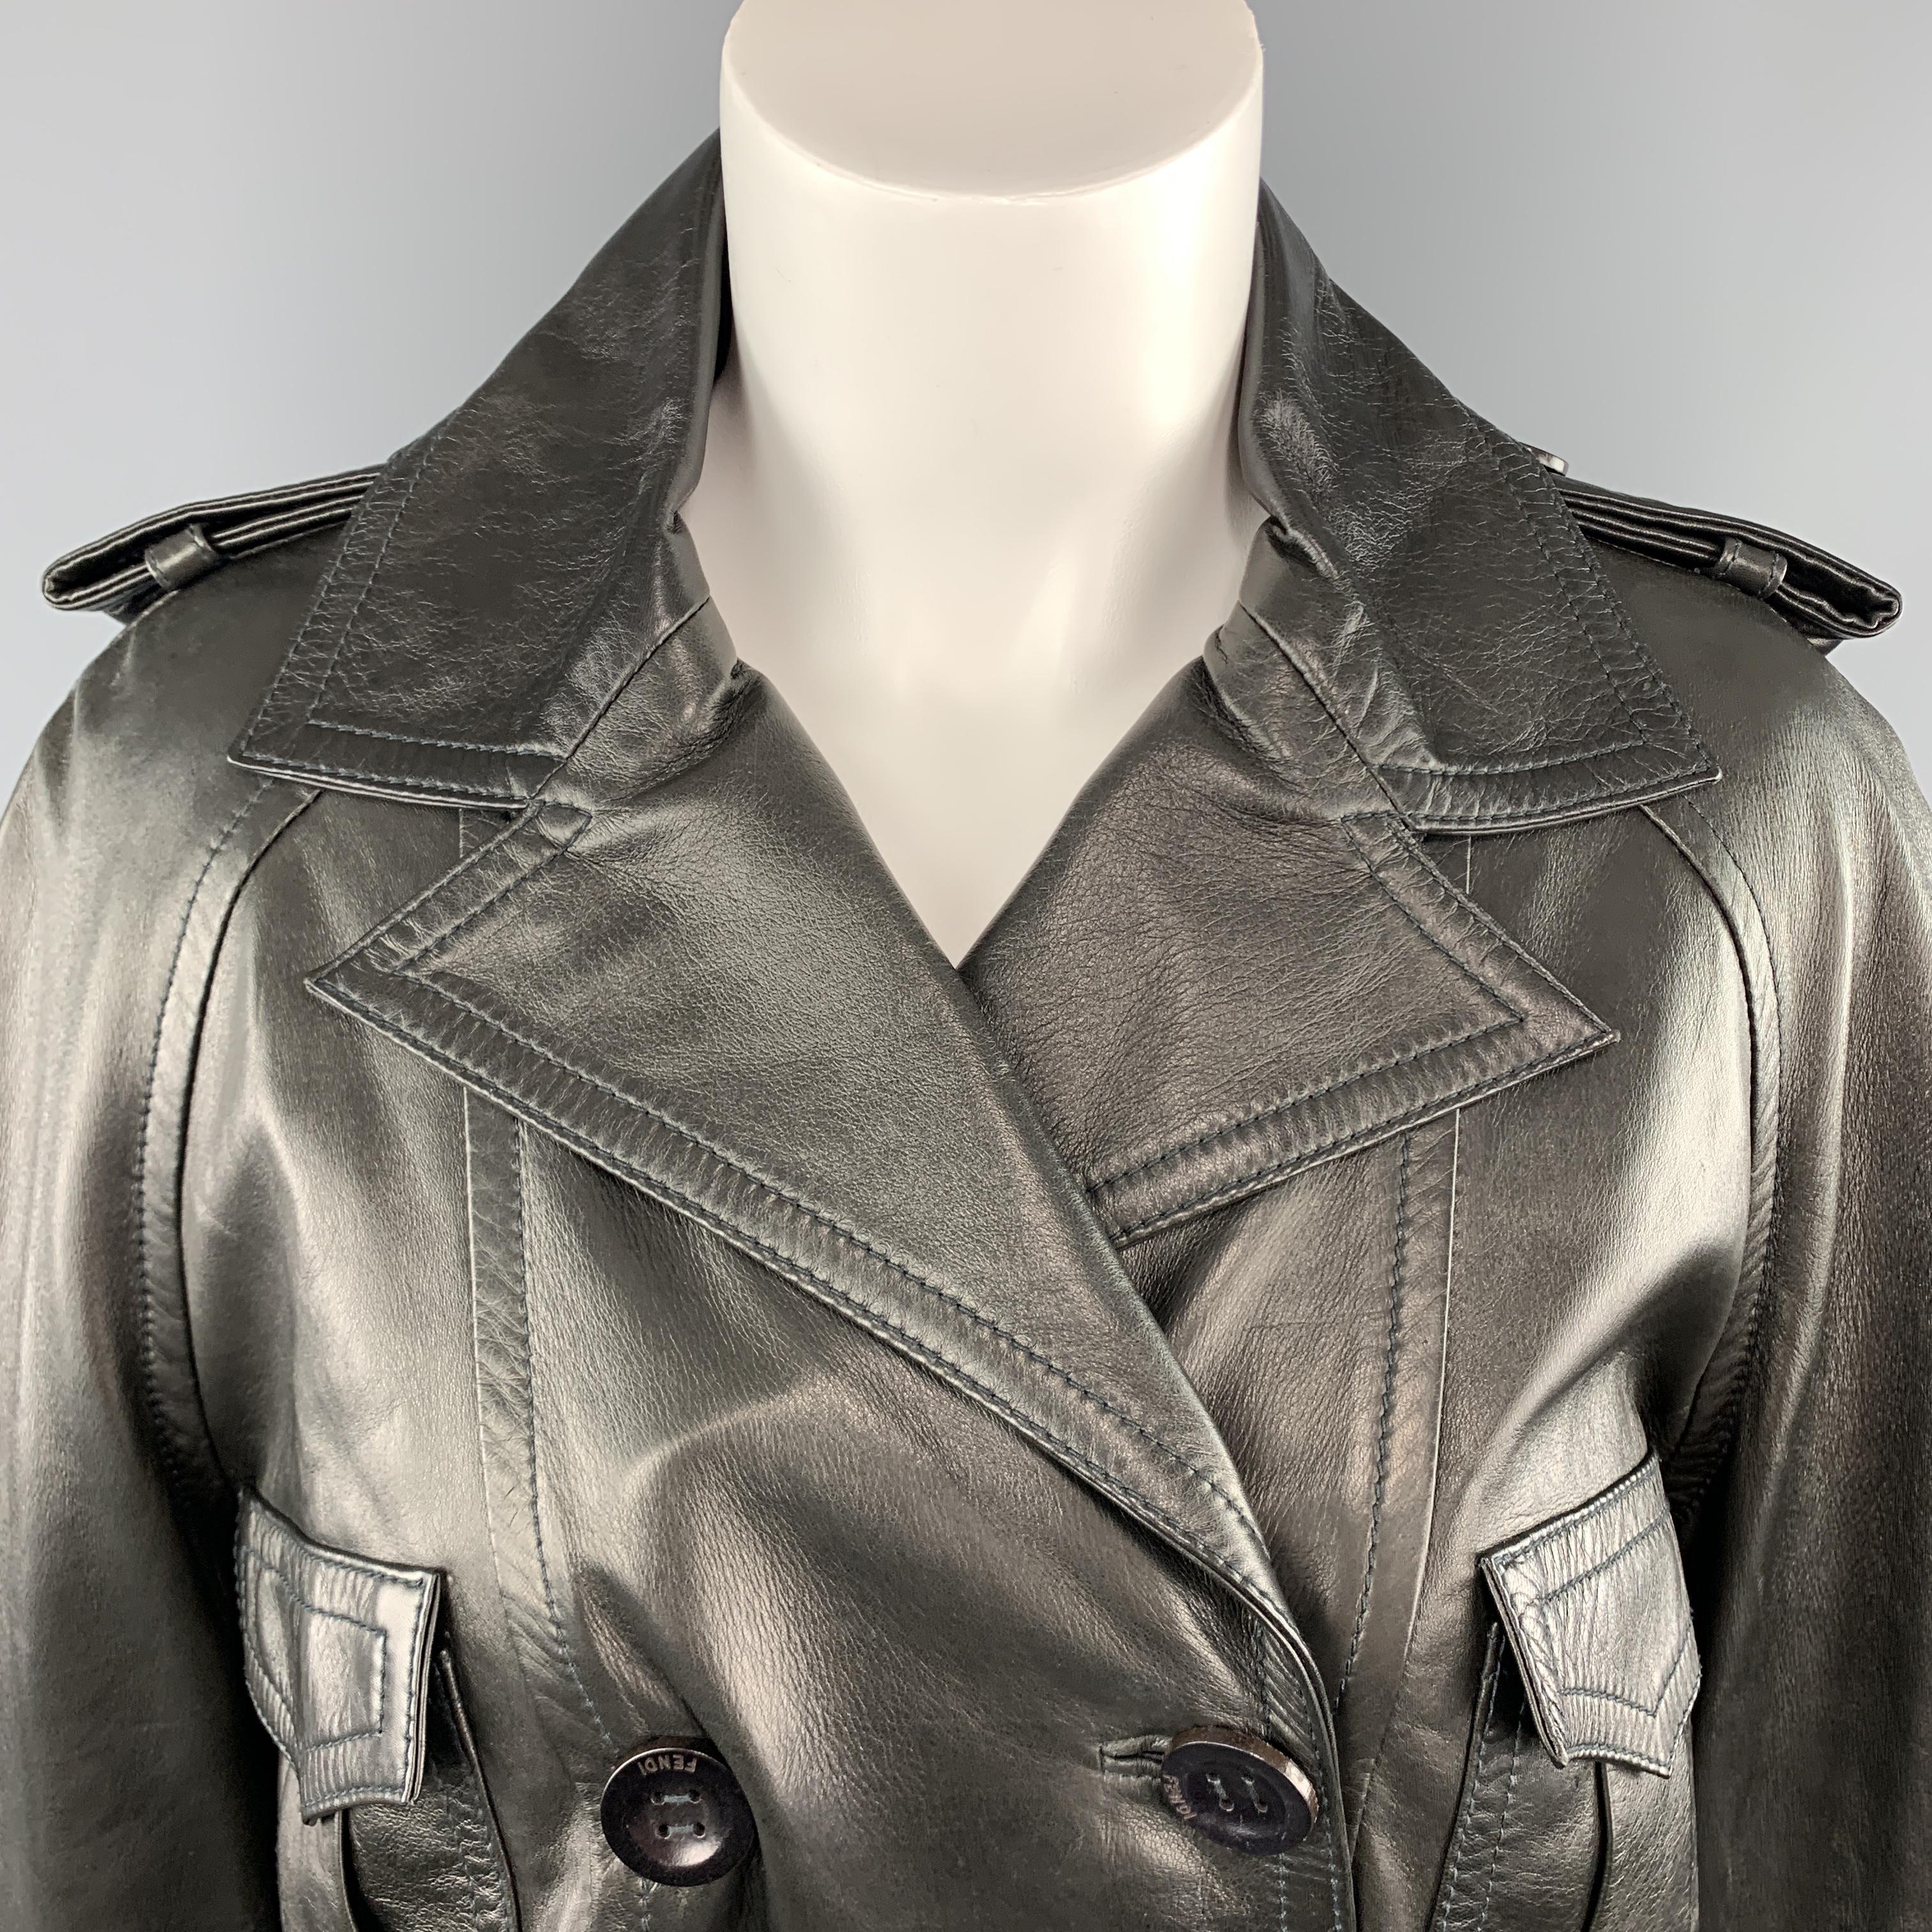 FENDI cropped military style jacket comes in smooth black leather with a double breasted button front, pointed lapel, raglan sleeves with epaulets, and patch flap breast pockets. Made in Italy.

Excellent Pre-Owned Condition.
Marked: IT